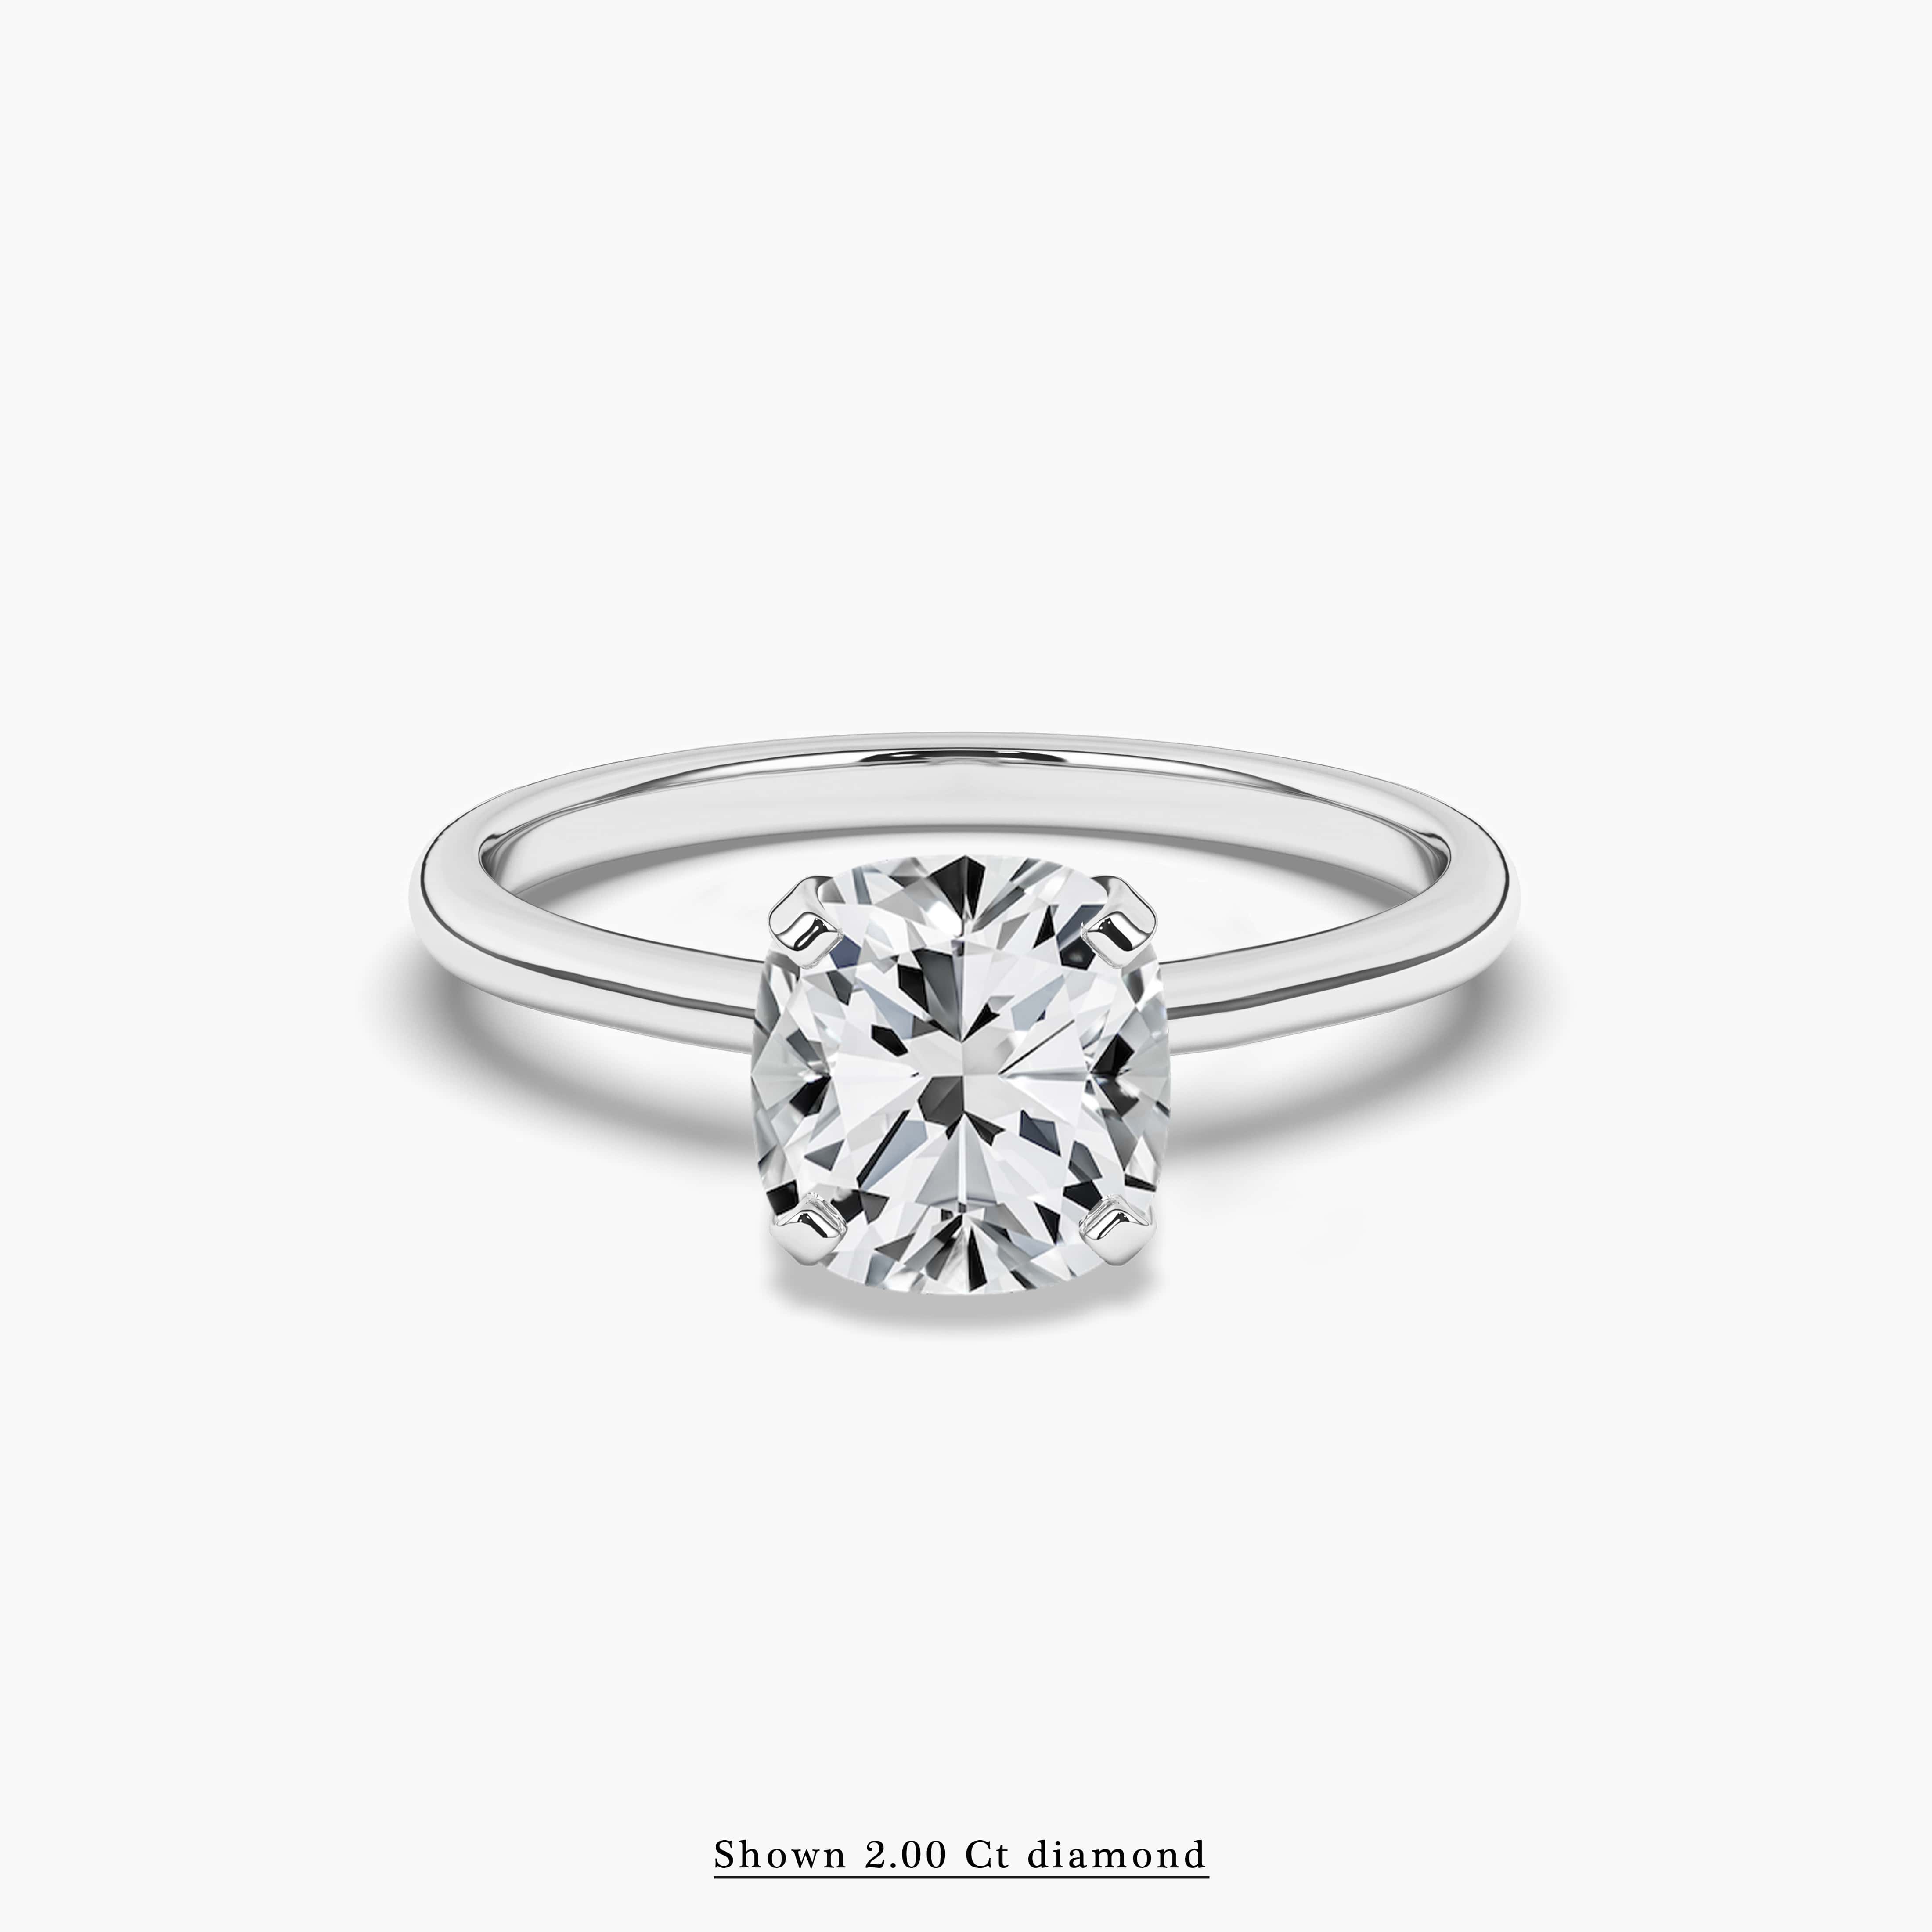 Solitaire Engagement Ring